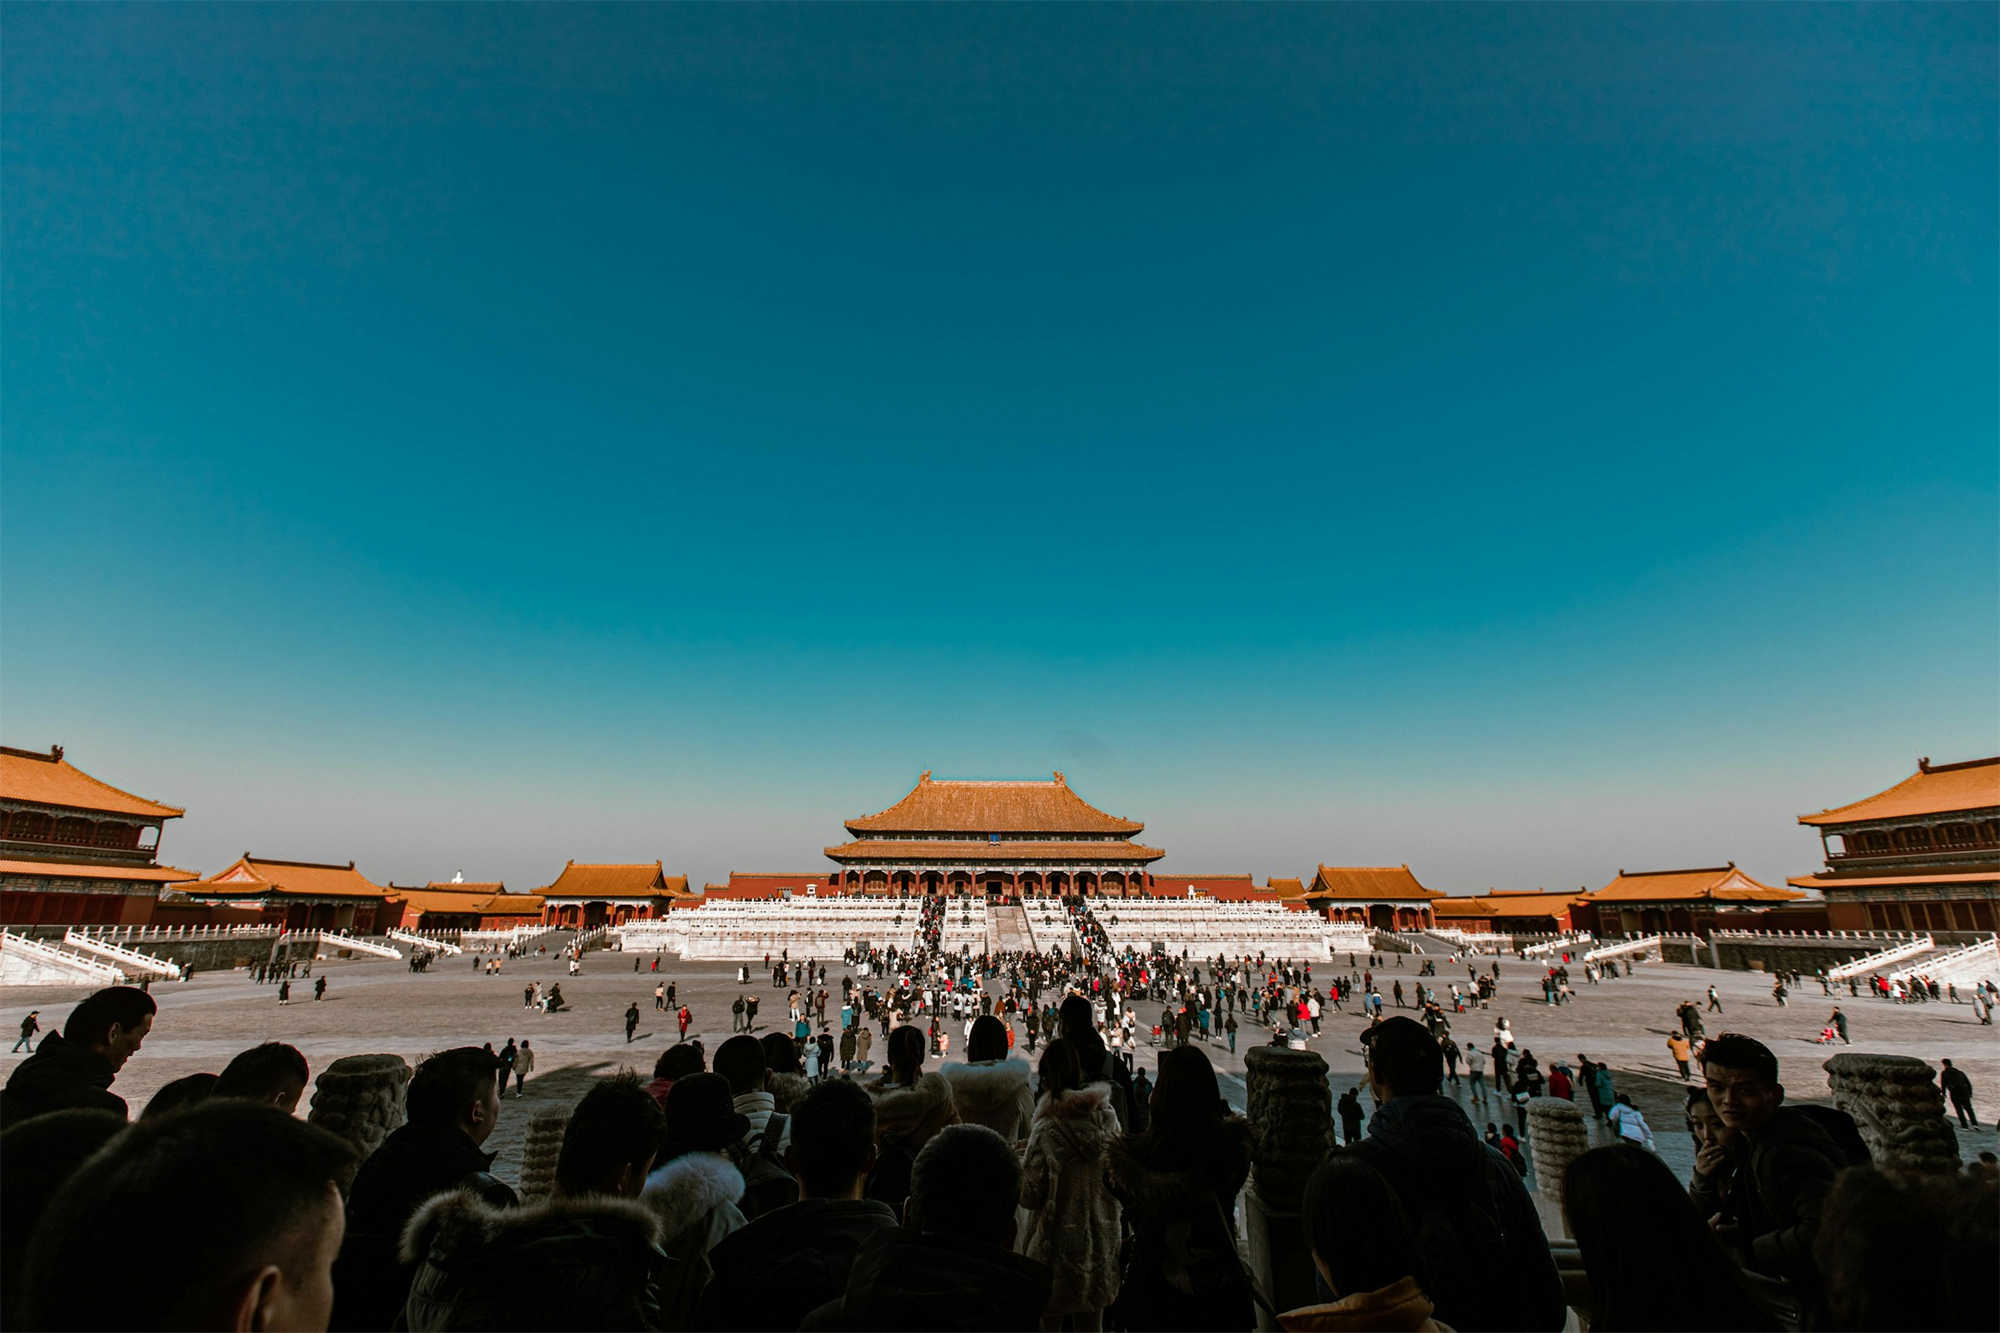 The Imperial Palace The Palace Museum The Forbidden City Beijing Private tour Beijing travel beijing trip 